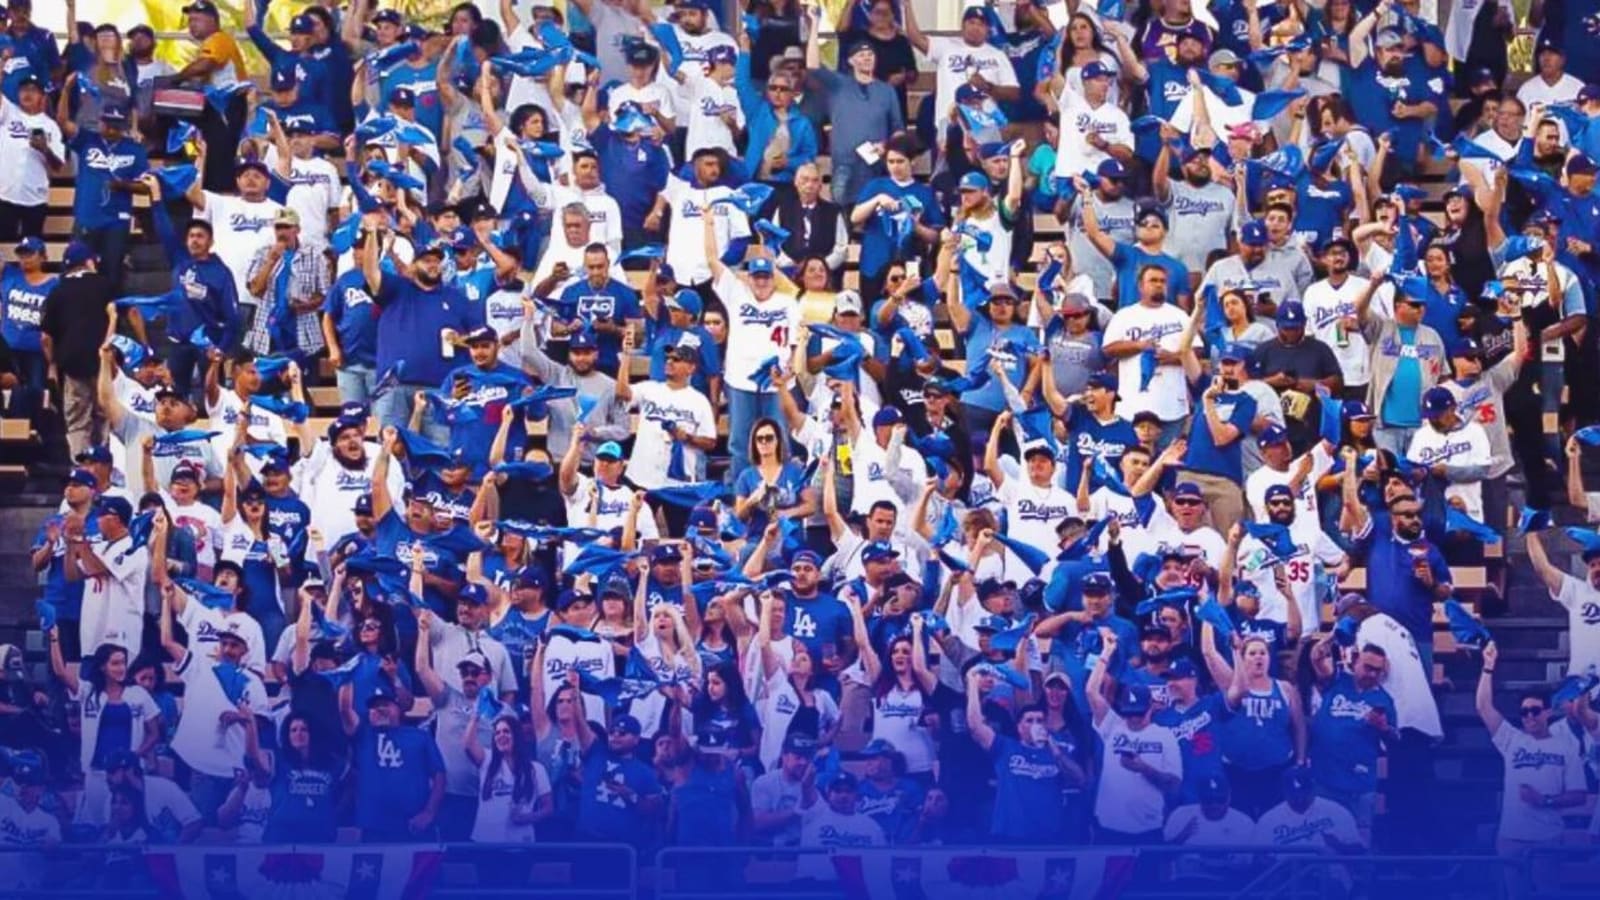 Shohei Ohtani bobblehead night has Dodgers fans in insane lines to street